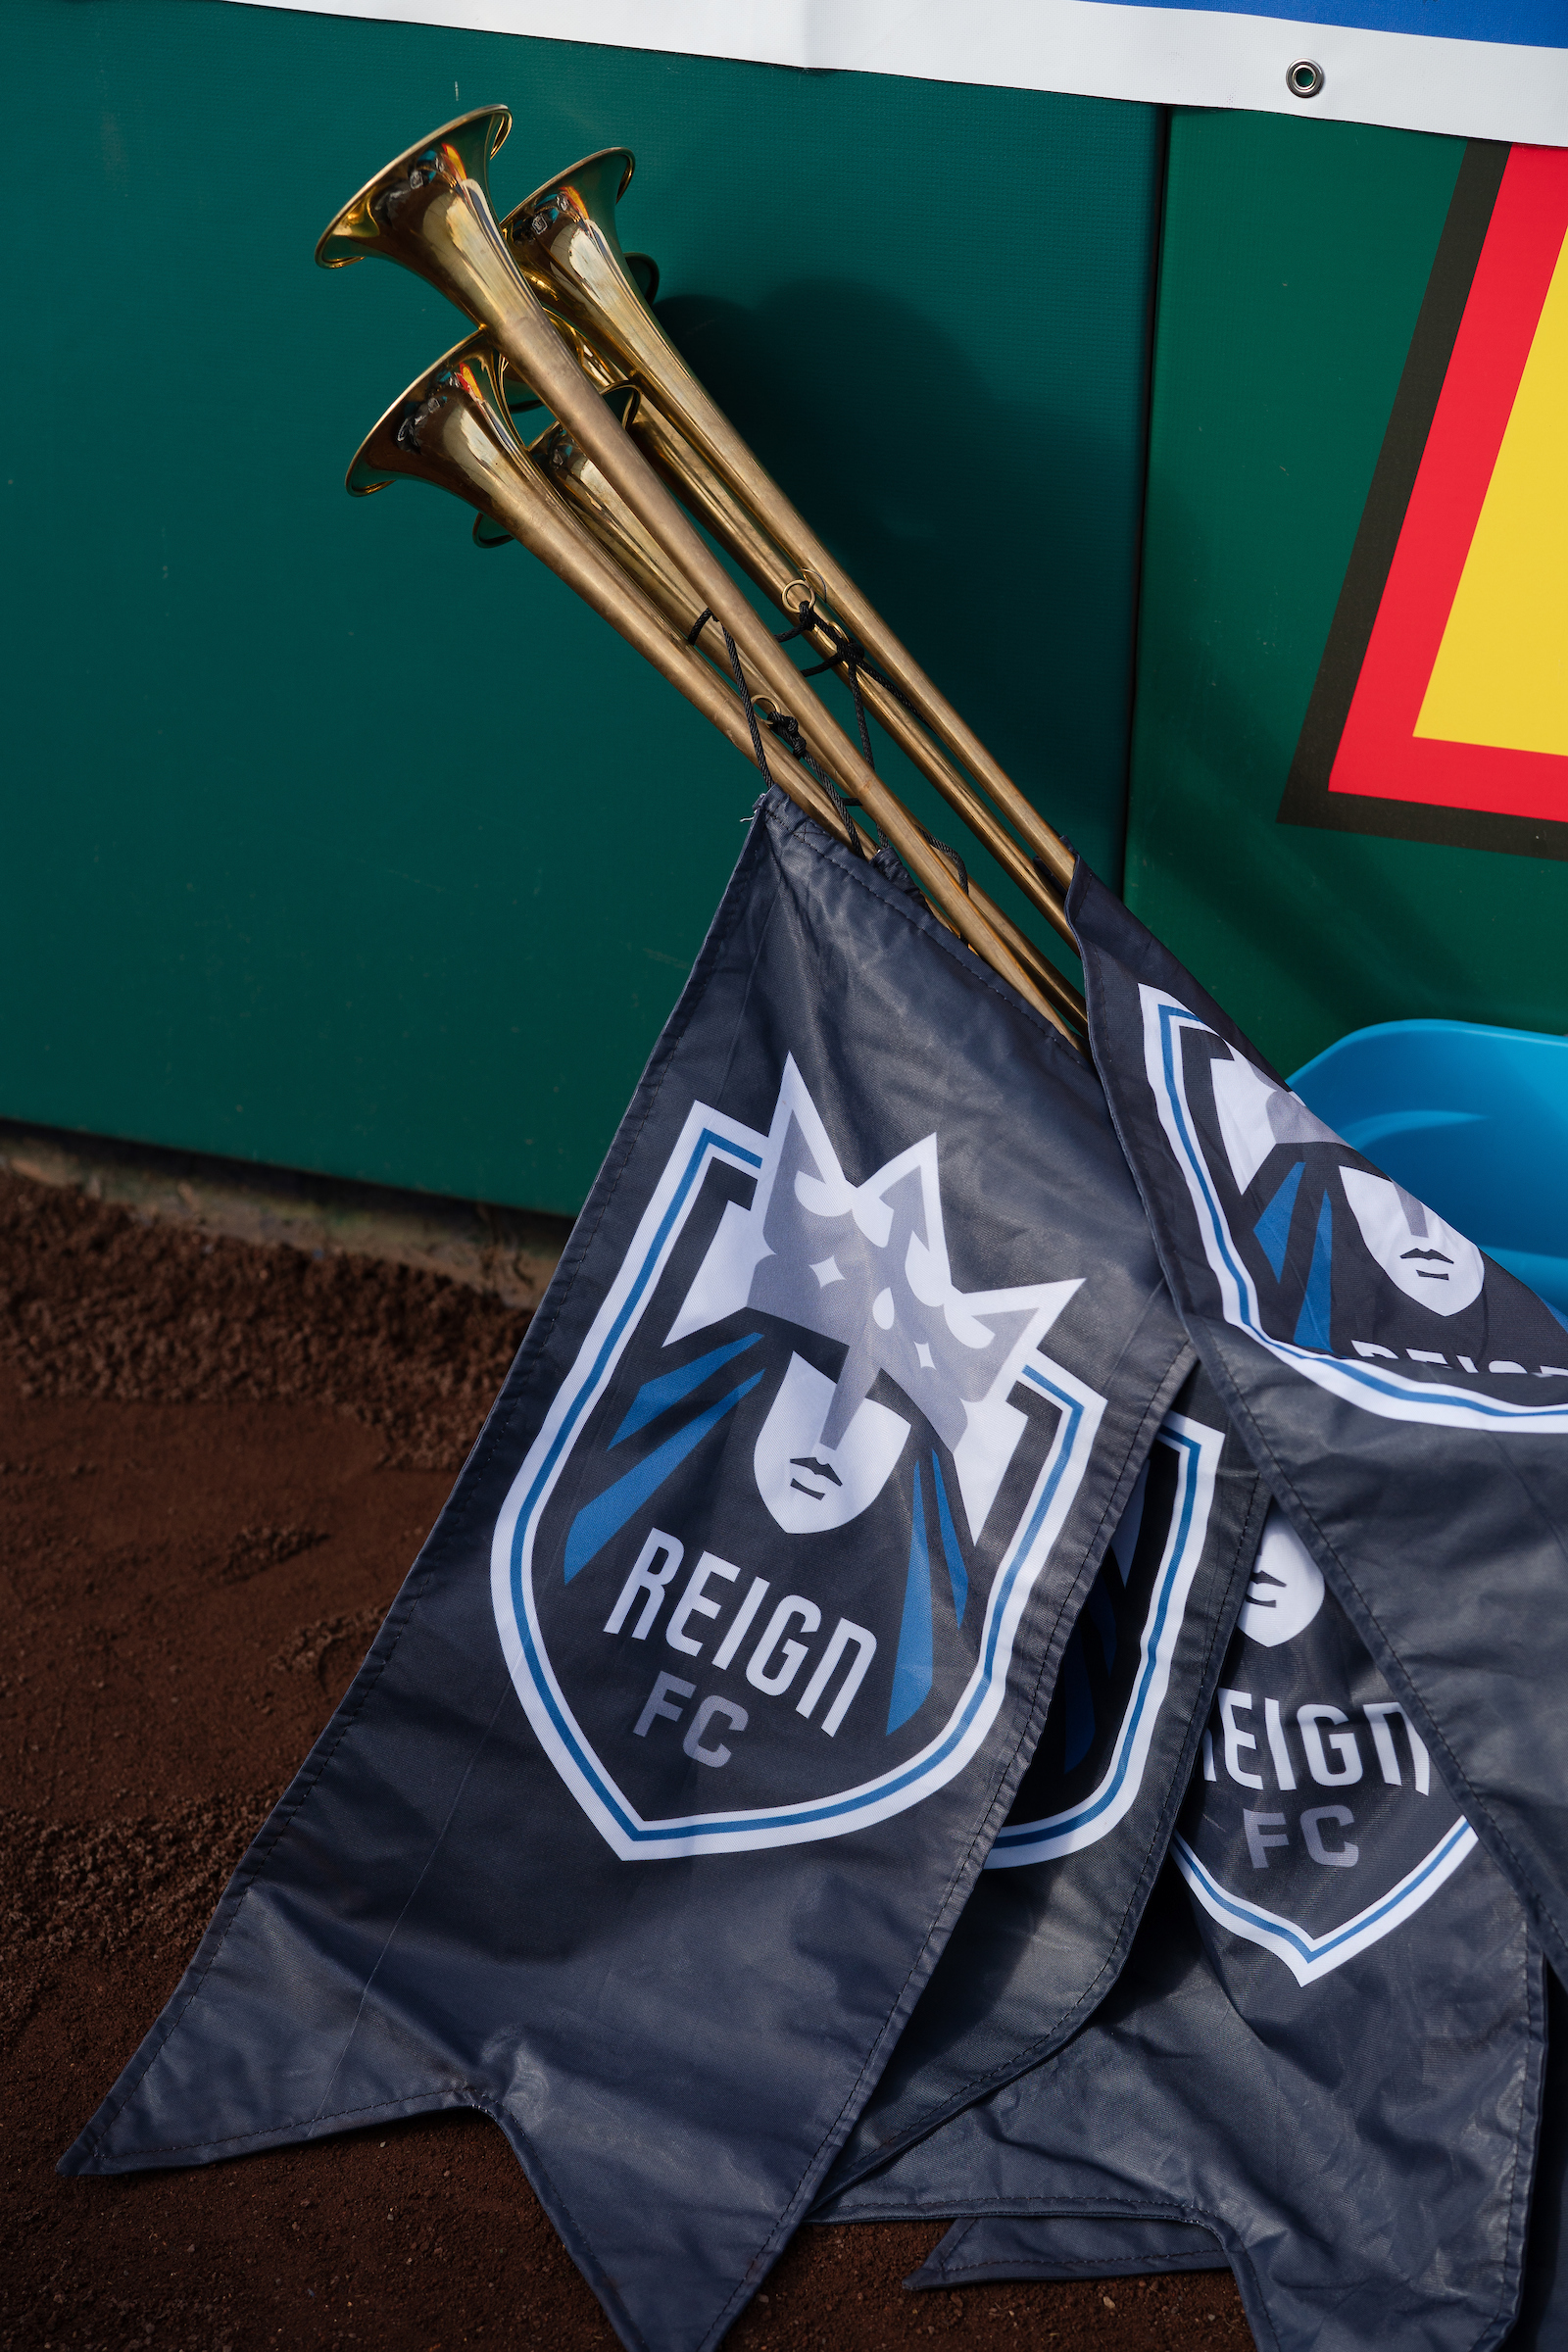 Reign FC banners lay on the ground